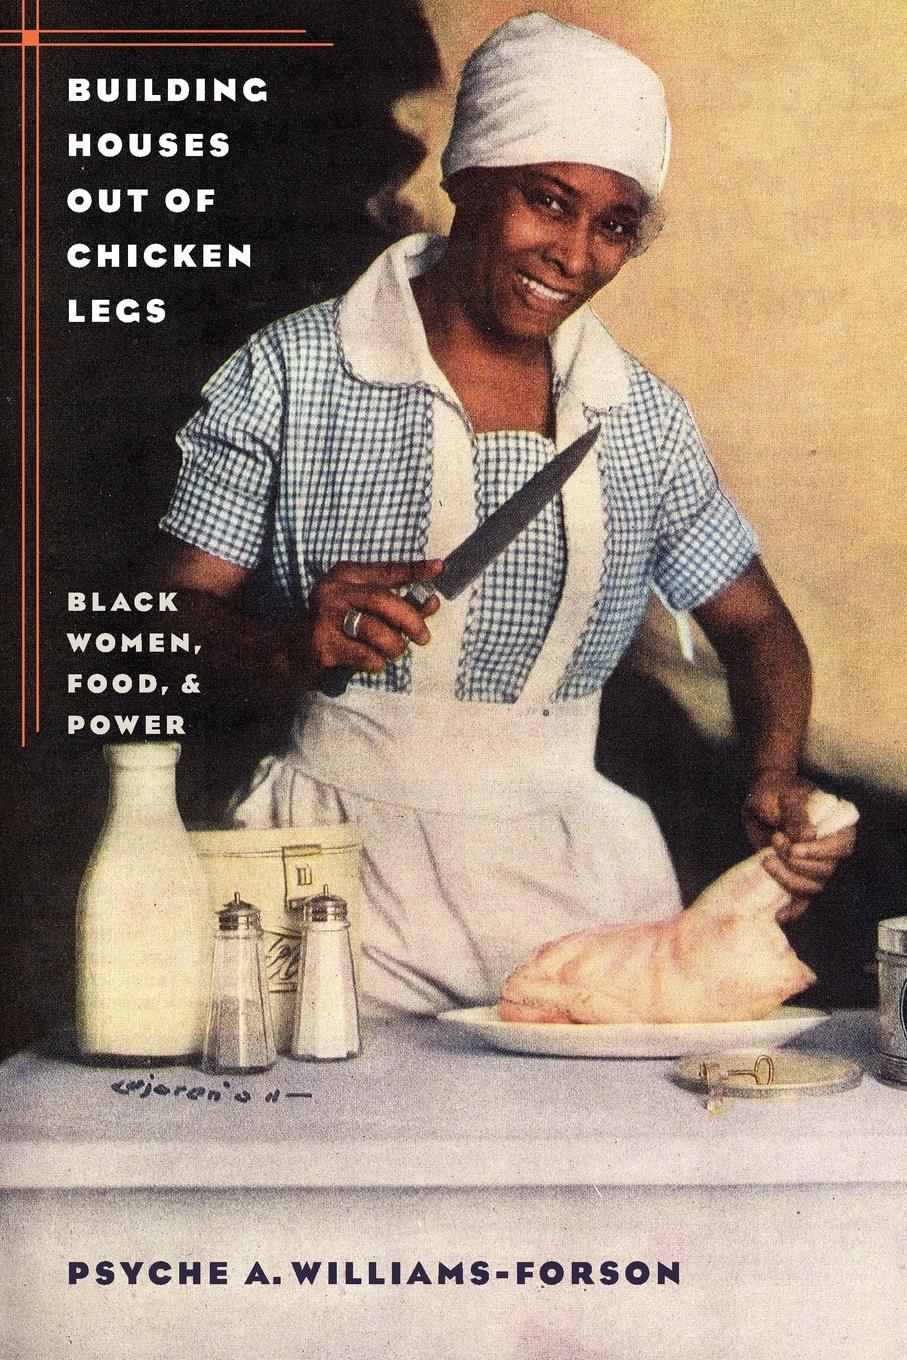 Building Houses out of Chicken Legs / Black Women, Food, and Power / Psyche A. Williams-Forson / Taschenbuch / Paperback / Englisch / 2006 / The University of North Carolina Press / EAN 9780807856864 - Williams-Forson, Psyche A.